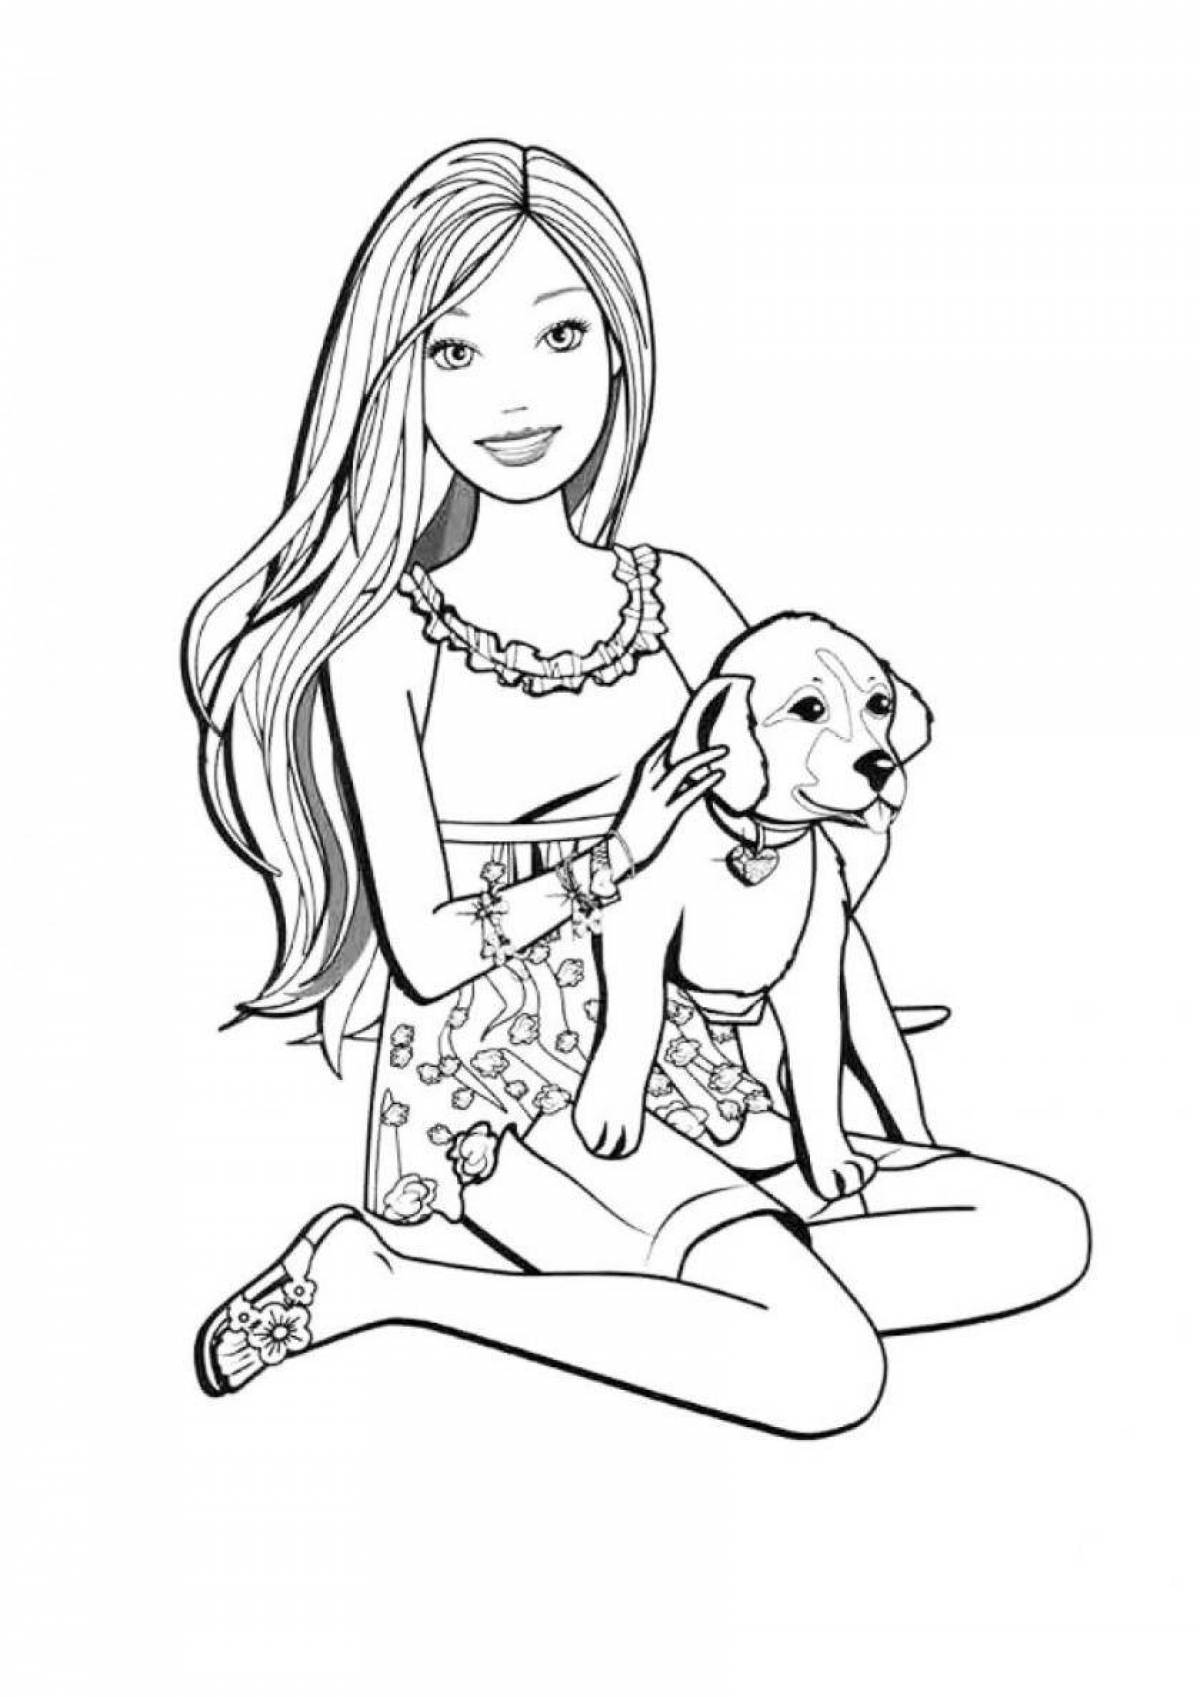 Colouring serene barbie with animals